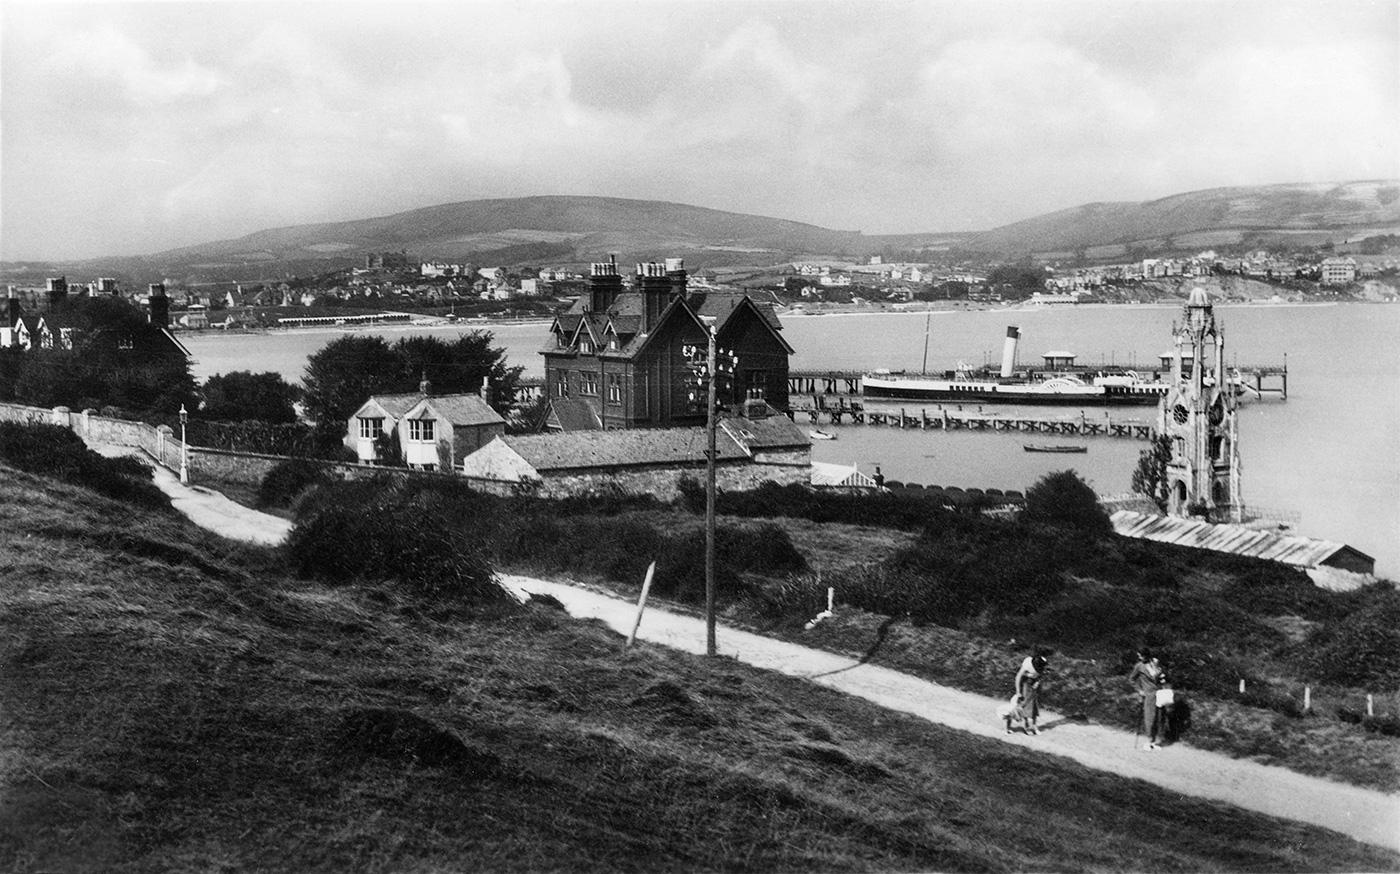 Swanage bay and Pier in the 1930s